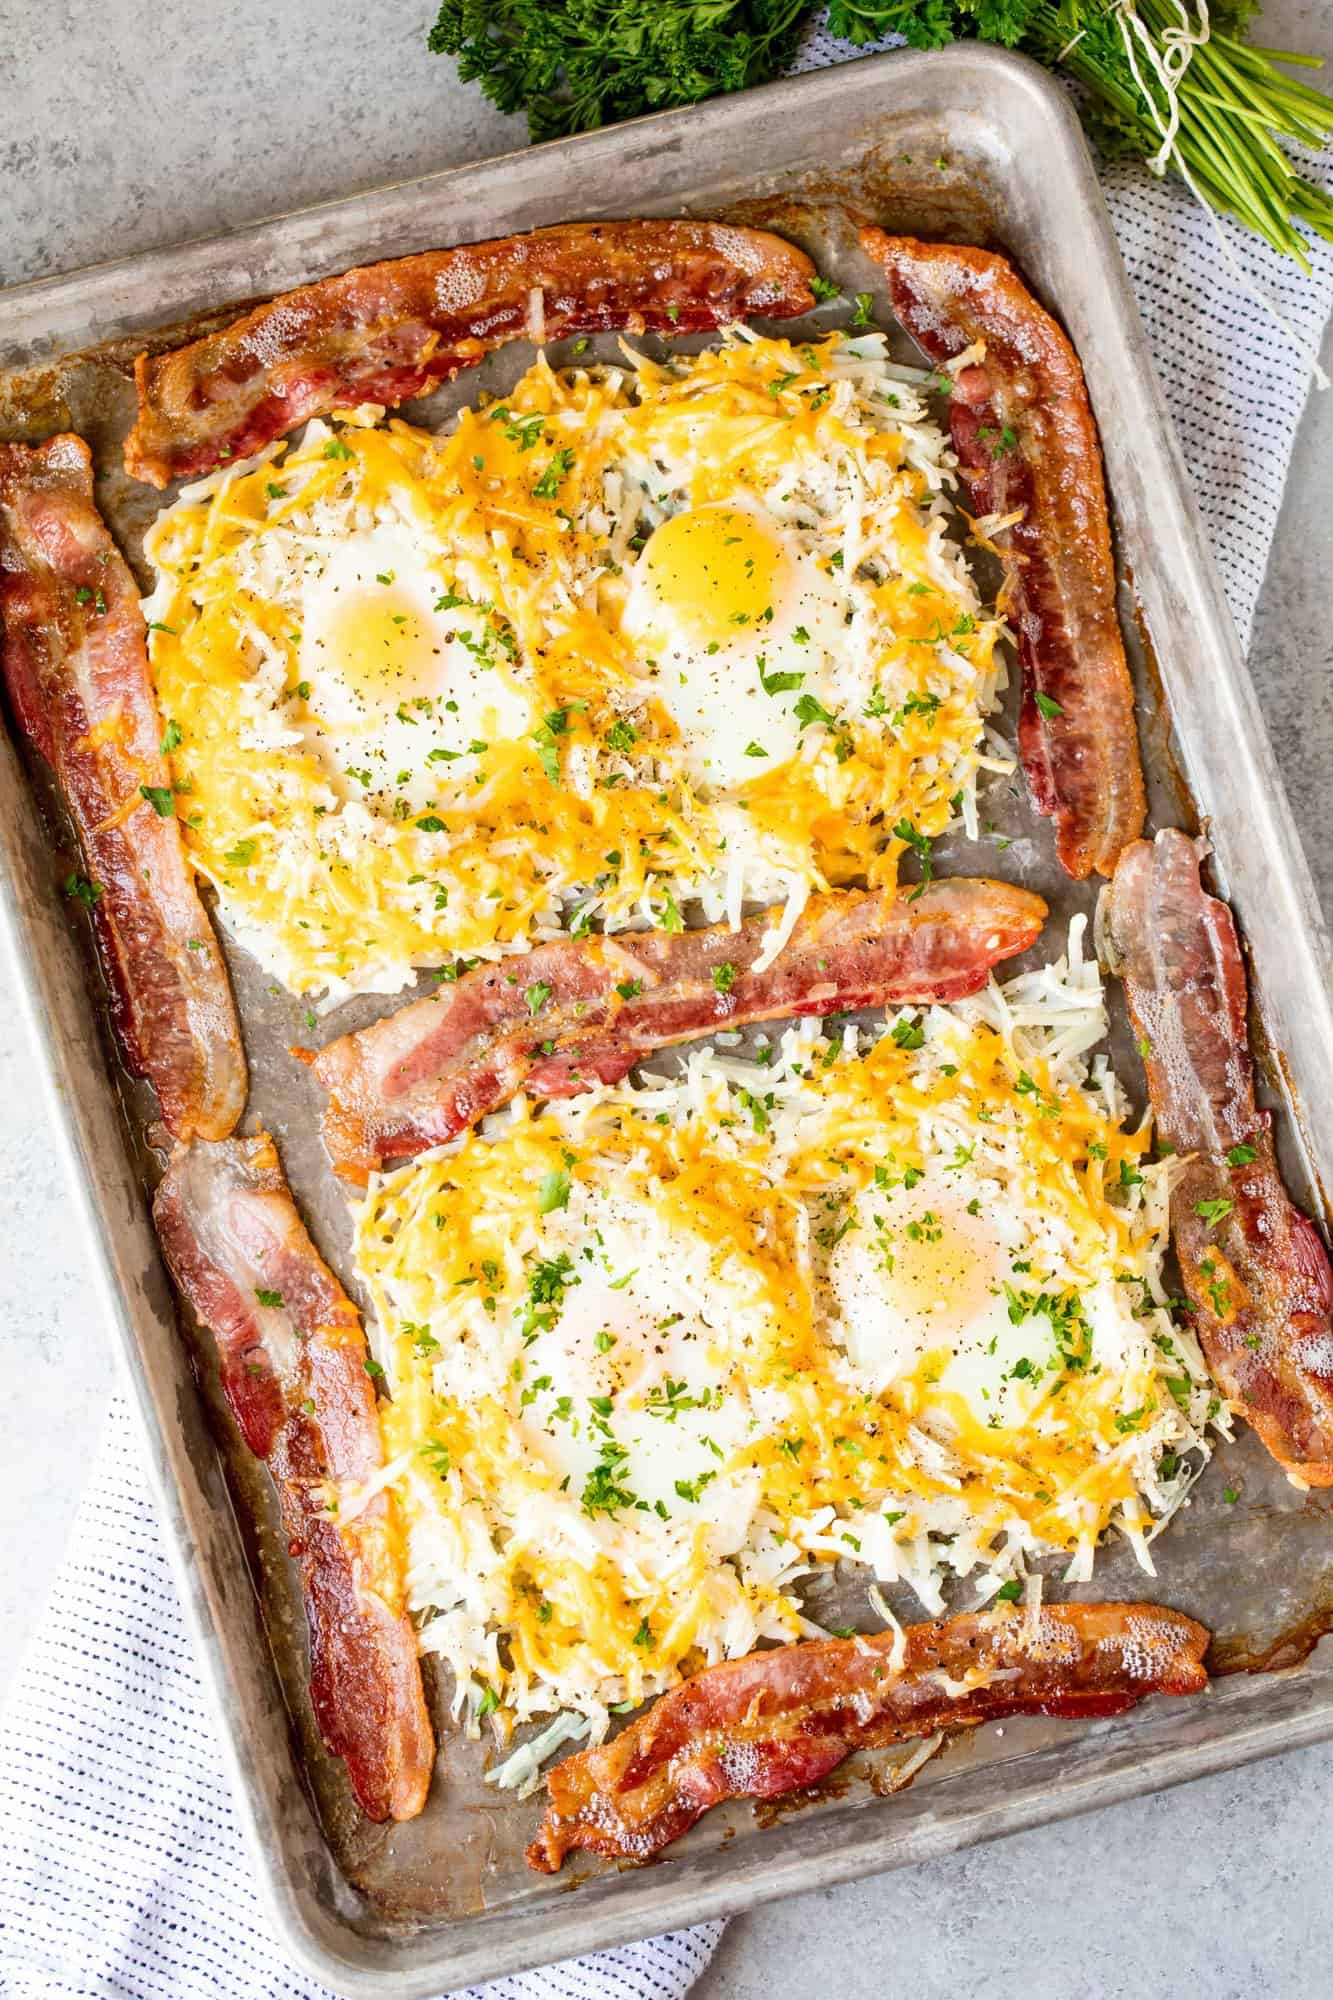 Crispy bacon surrounds eggs cooked in nests of hash browns on a sheet pan